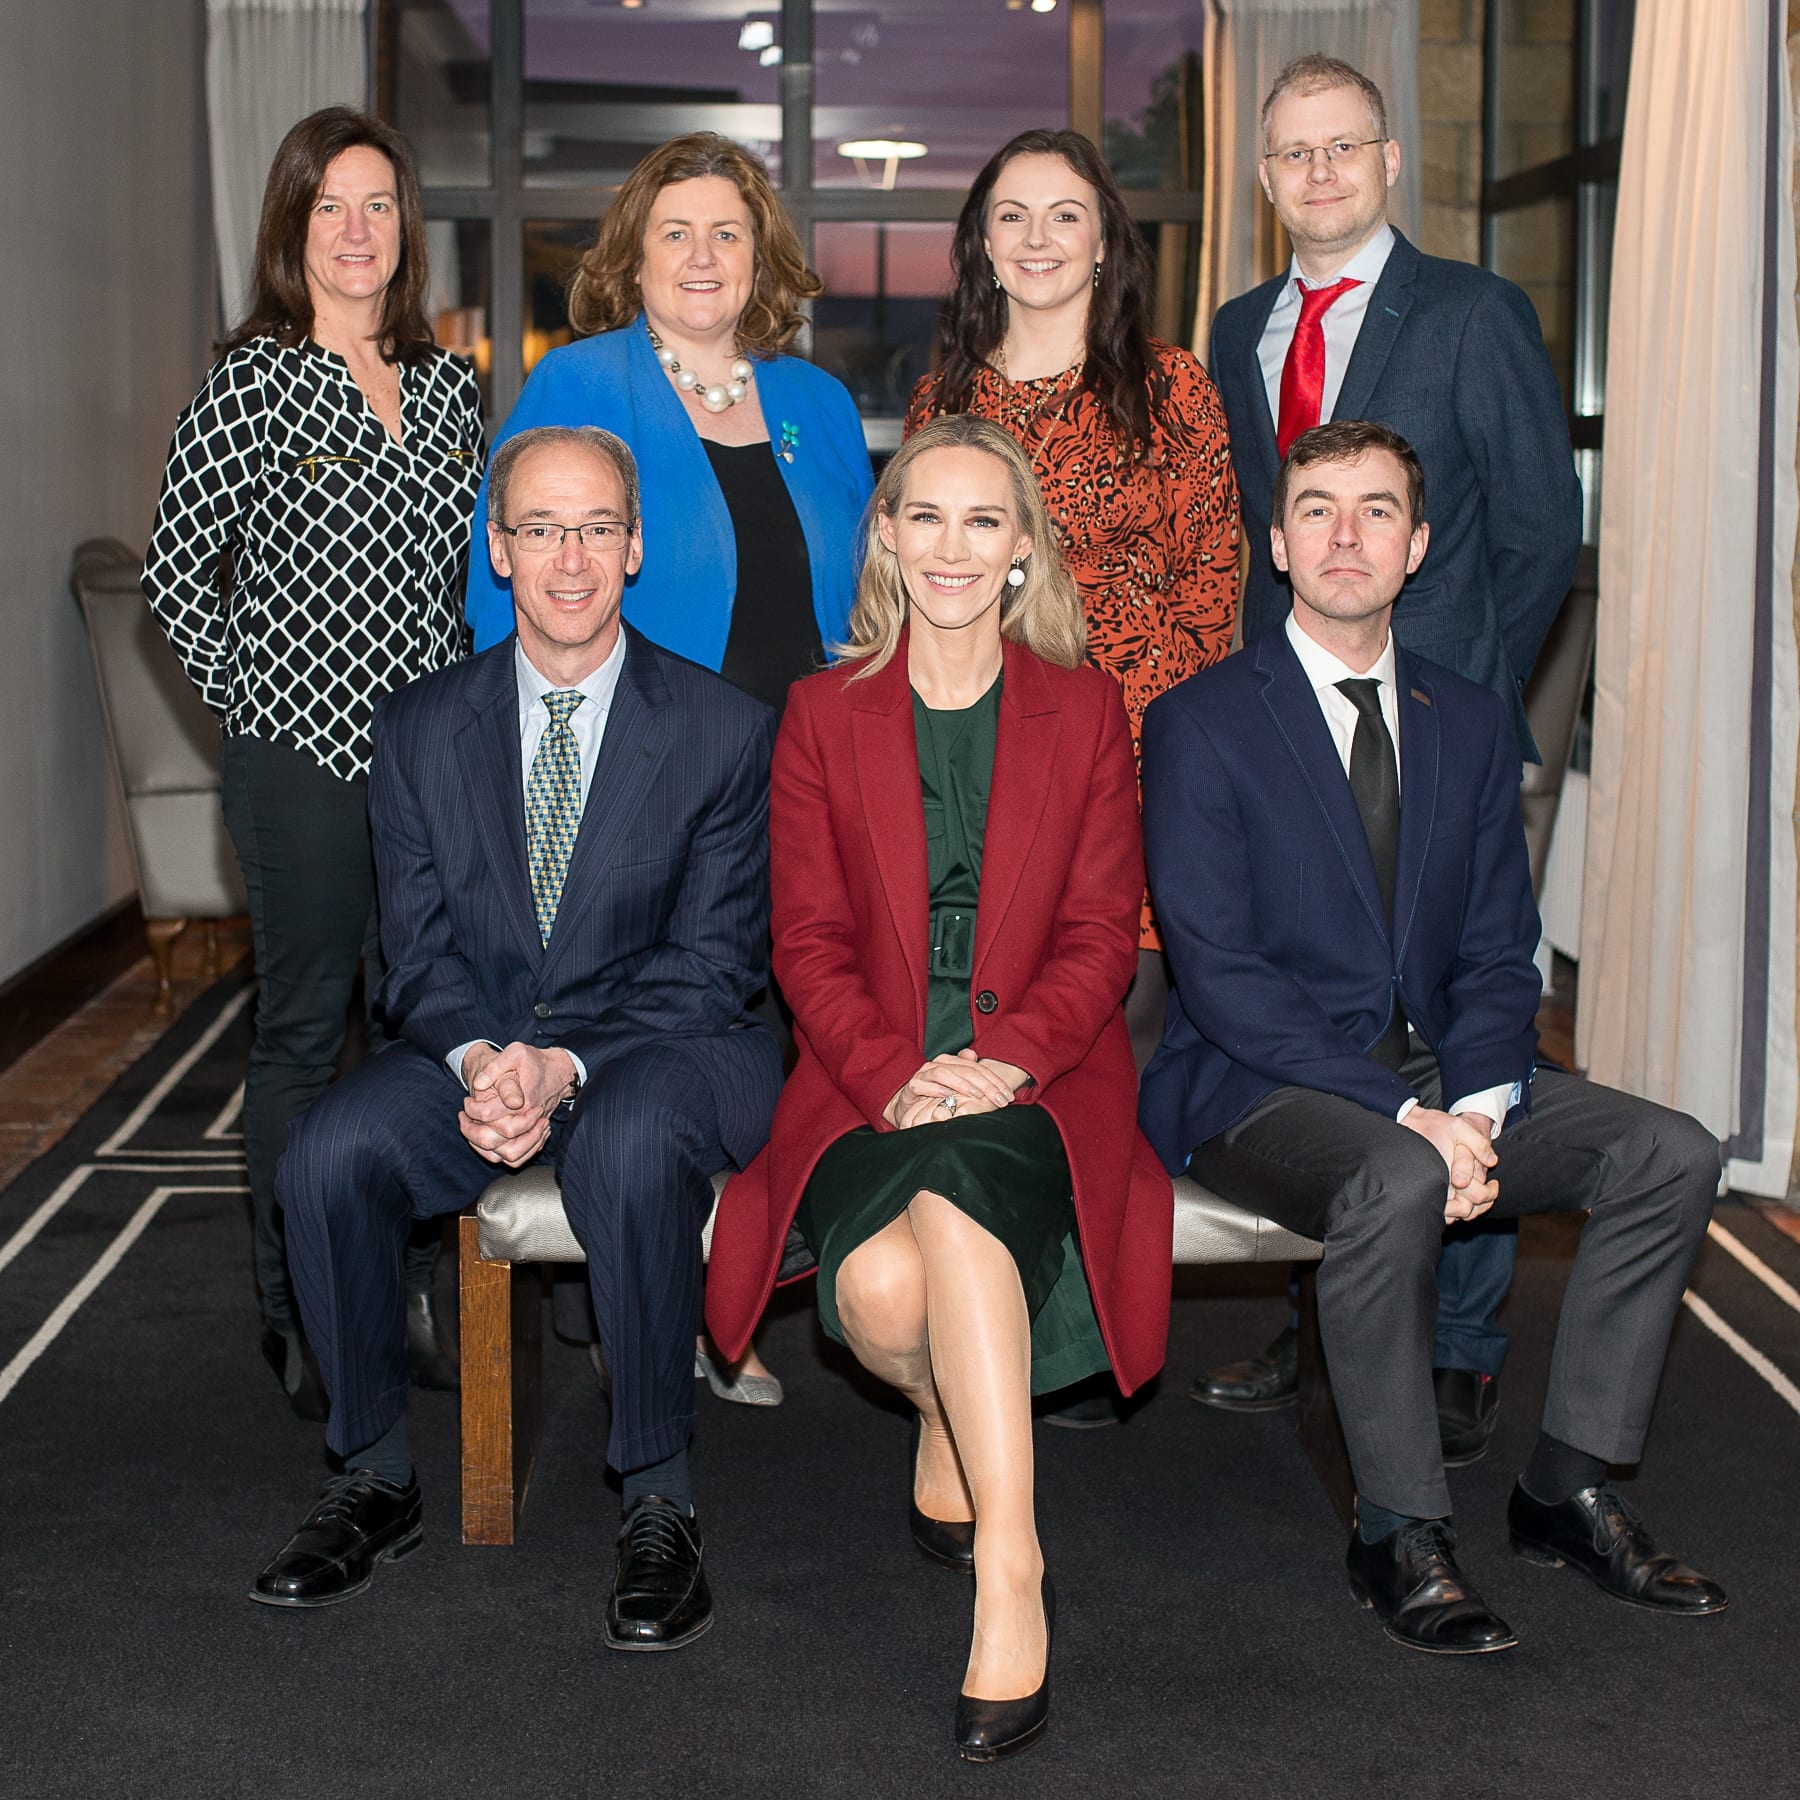 Economic Breakfast Briefing; European and Local Economic Outlook In association with the Limerick Post which took place in the Castletroy Park Hotel on Monday 11th Feb 2019:  From left to right: Back Row: Dr Mary Shire- Limerick Chamber President, Catherine Duffy - General Manager Northern Trust, Dr. Catriona Cahill - Limerick Chamber Economist/ Speaker, Will Ryan- Editor Limerick Post. Front Row: Mr. Carl R. Tannenbaum - Executive Vice President, Chief Economist, Northern Trust / Speaker, Dee Ryan - CEO Limerick Chamber, Prof. Stephen Kinsella - Associate Professor, Kemmy Business School, University of Limerick / SpeakerImages by Morning Star Photography